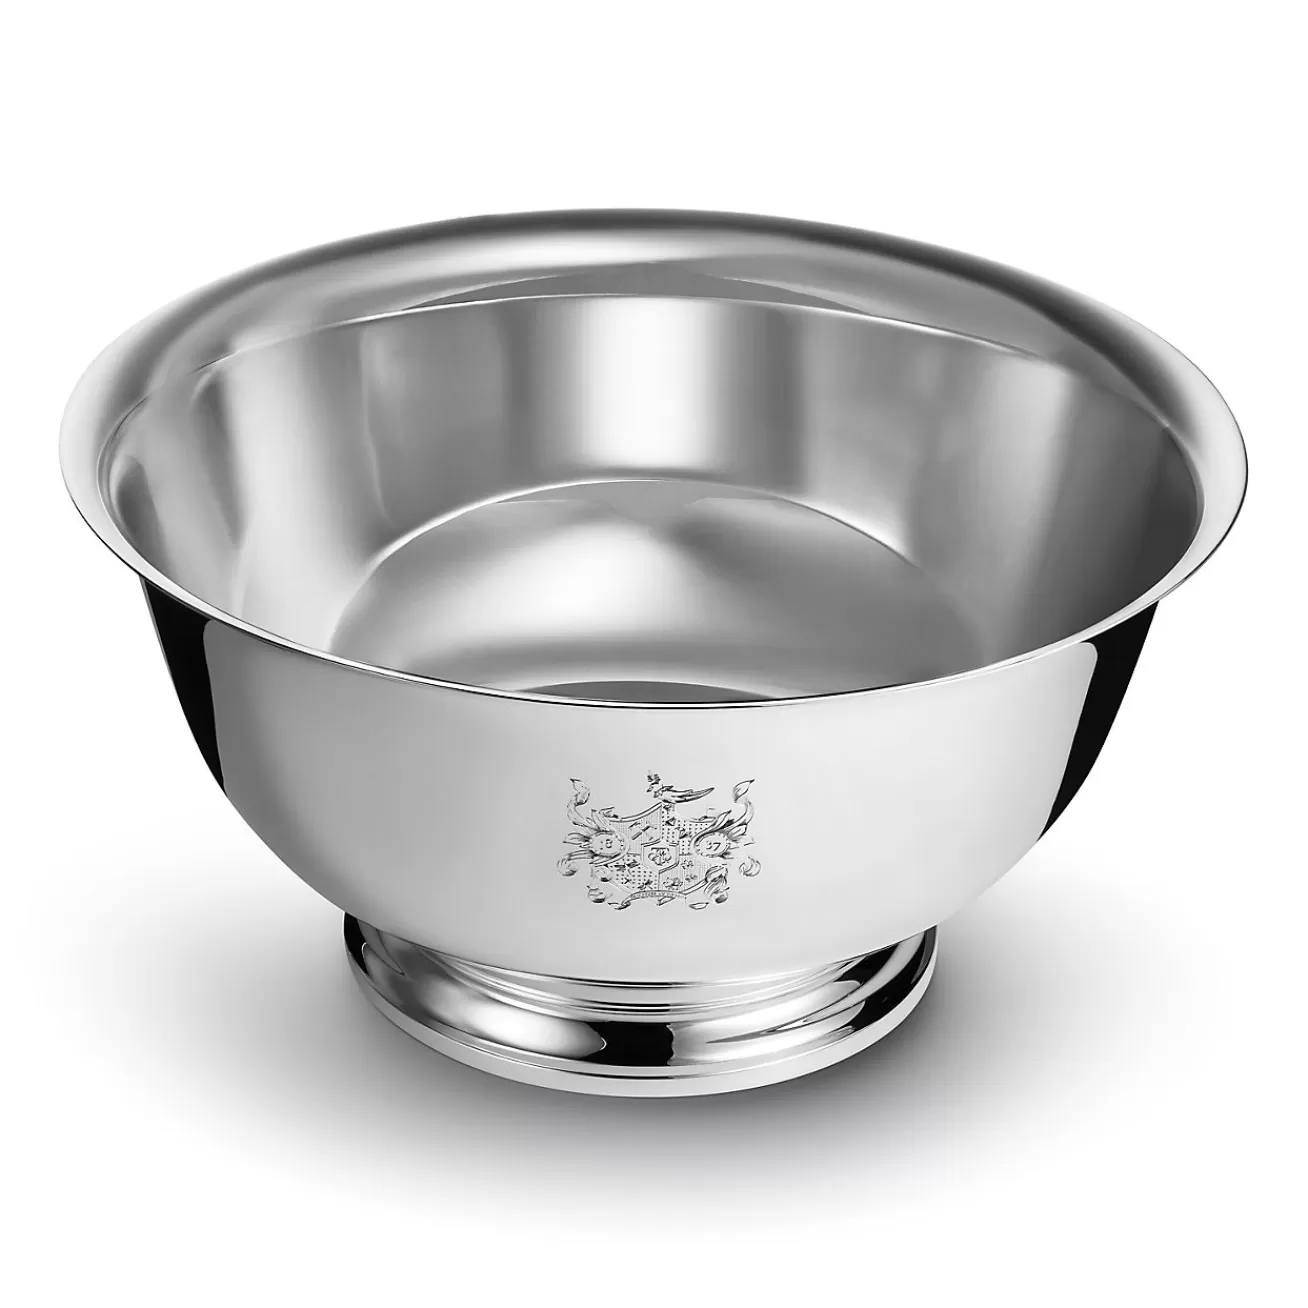 Tiffany & Co. Tiffany Crest Revere Bowl in Sterling Silver | ^ Tableware